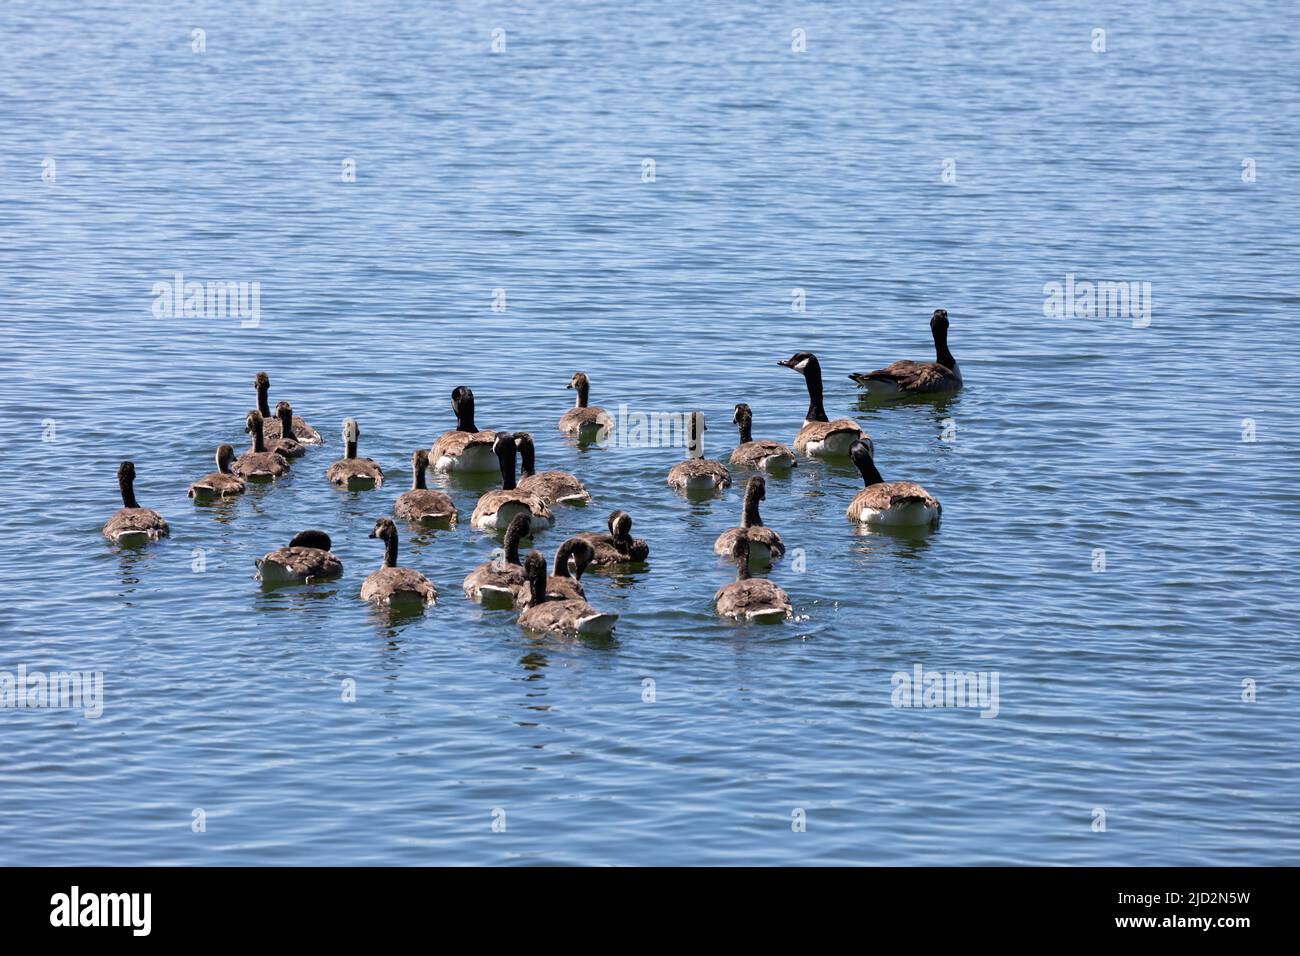 Group of Canada geese, Branta canadensis, swimming on a lake in Dorset, England in early summer Stock Photo